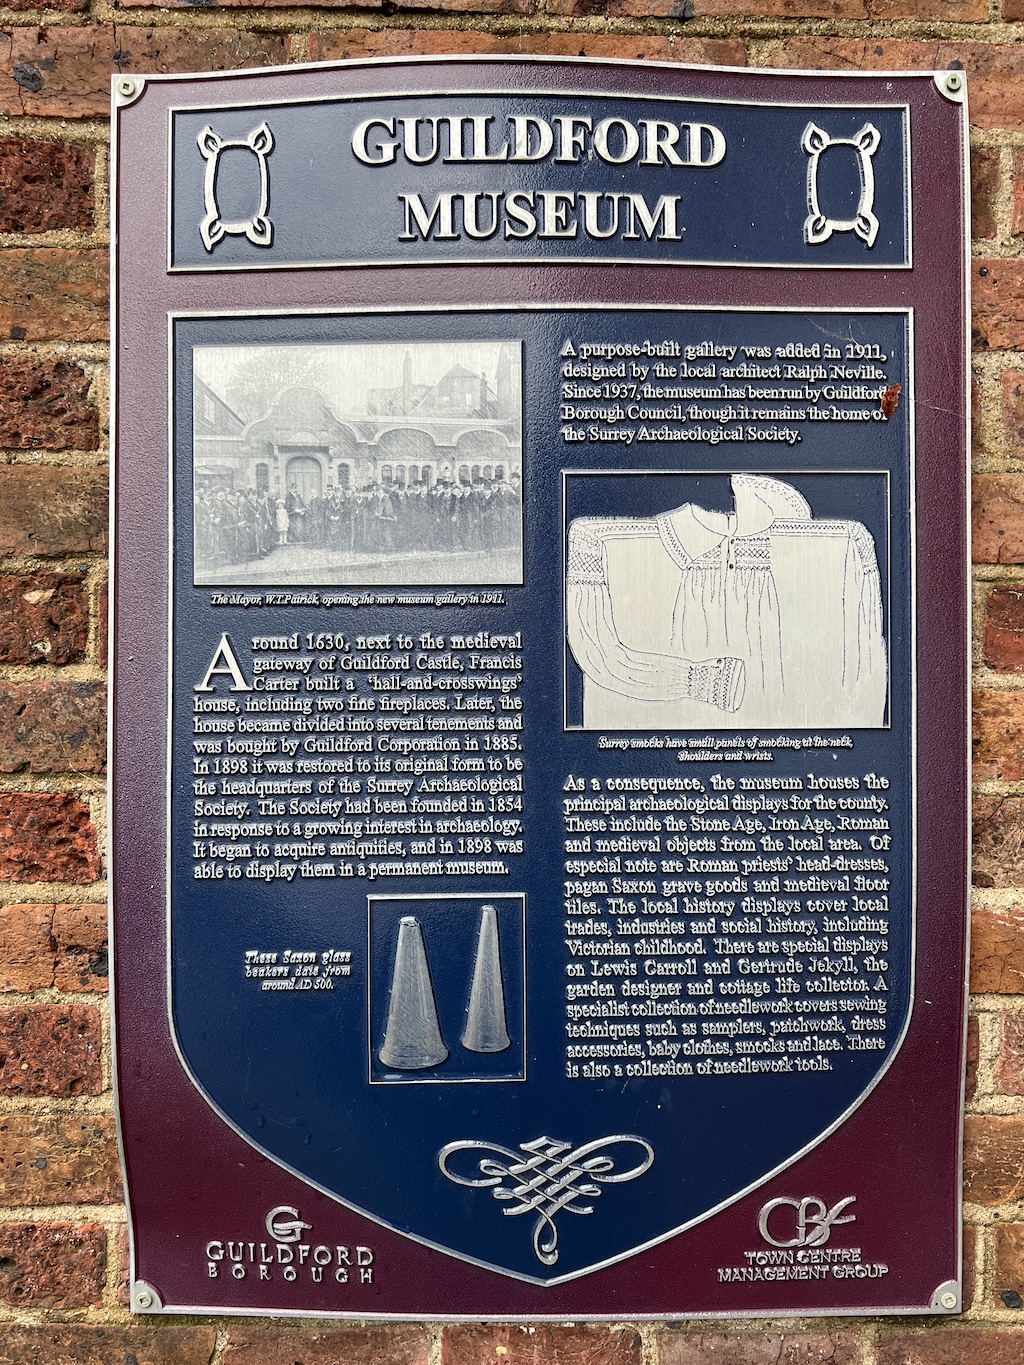 Blue plaque in Guildford for Guildford Museum